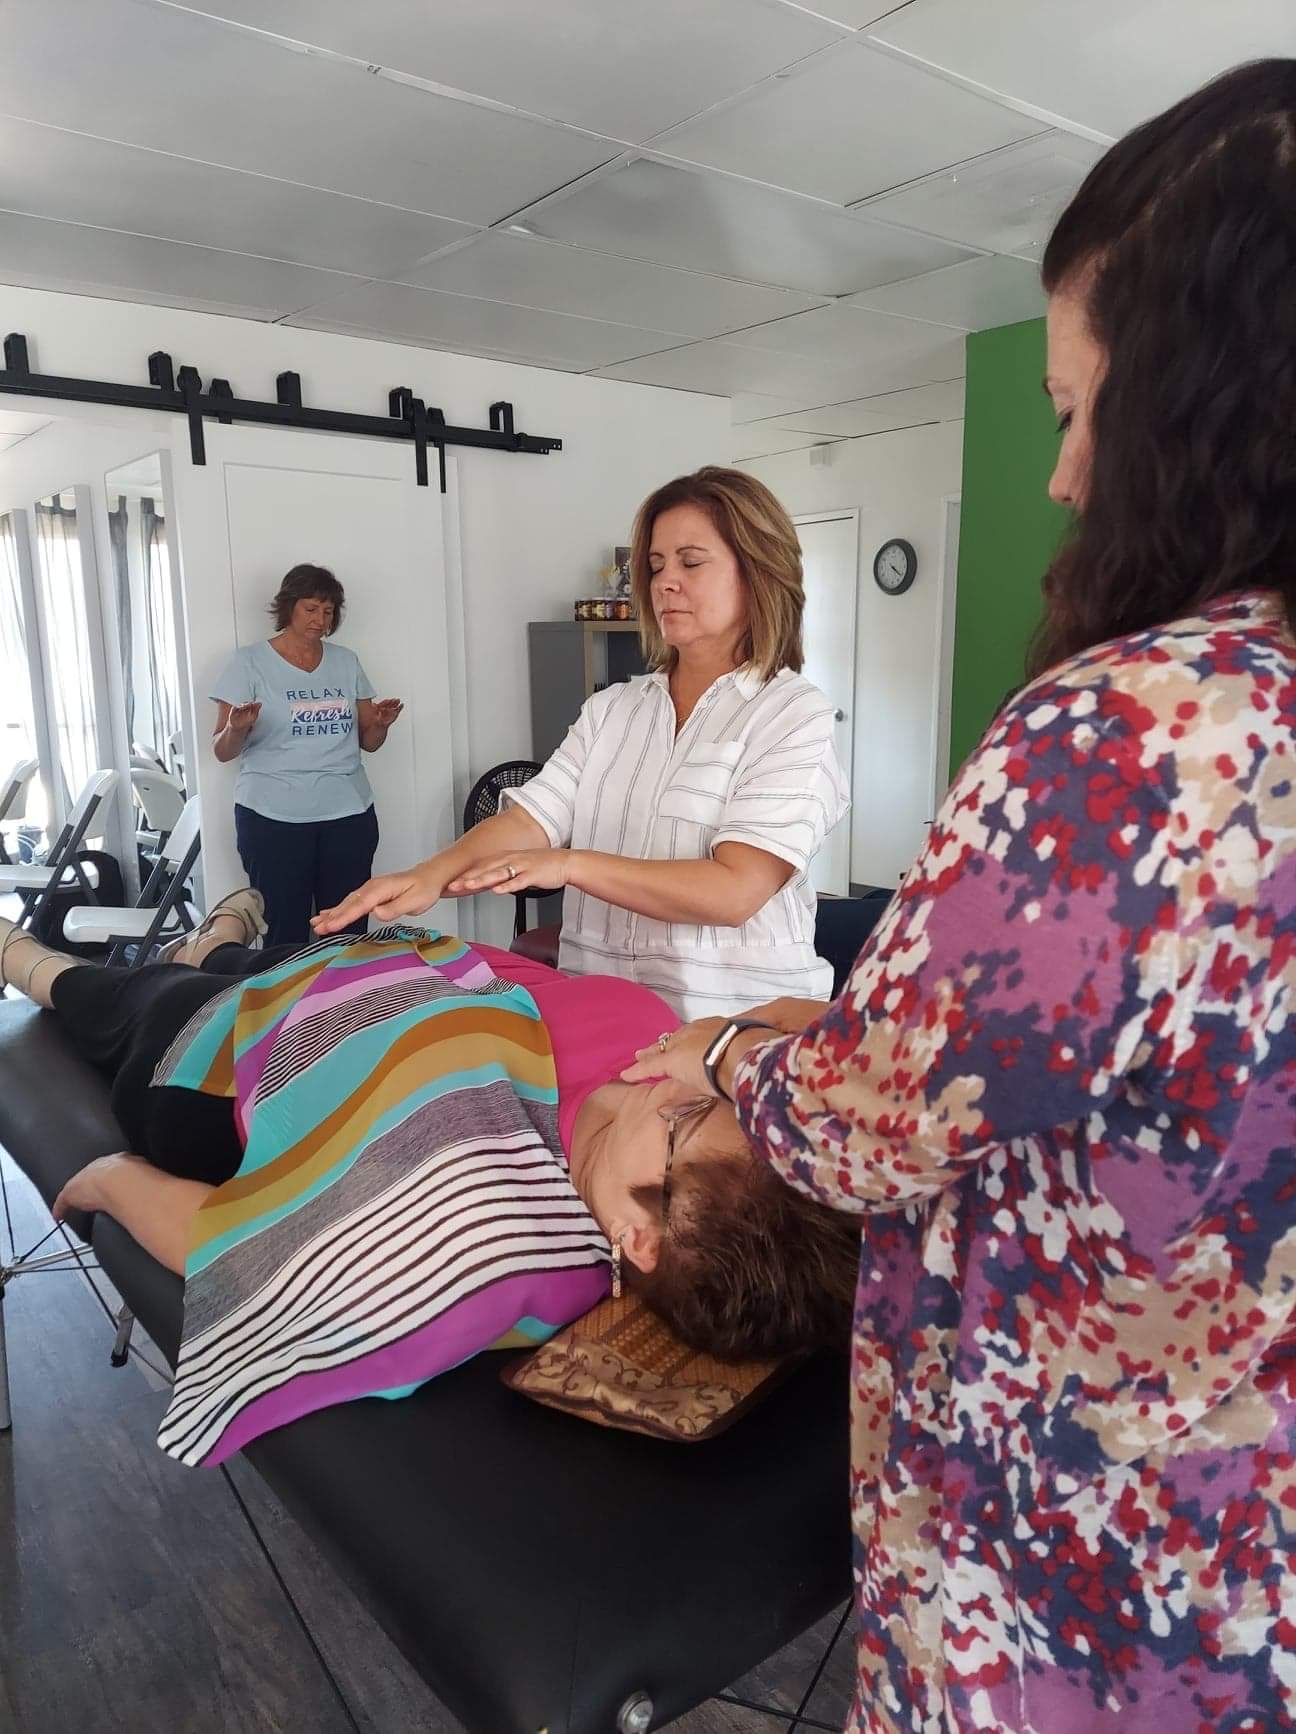 Reiki Benefits, reduce stress, increases relaxation, improves sleep, restores inner peace and harmony, balances mind and emotions, reduces pain, stimulates the immune system, fosters living in the present, speeds recovery form surgery or illness.